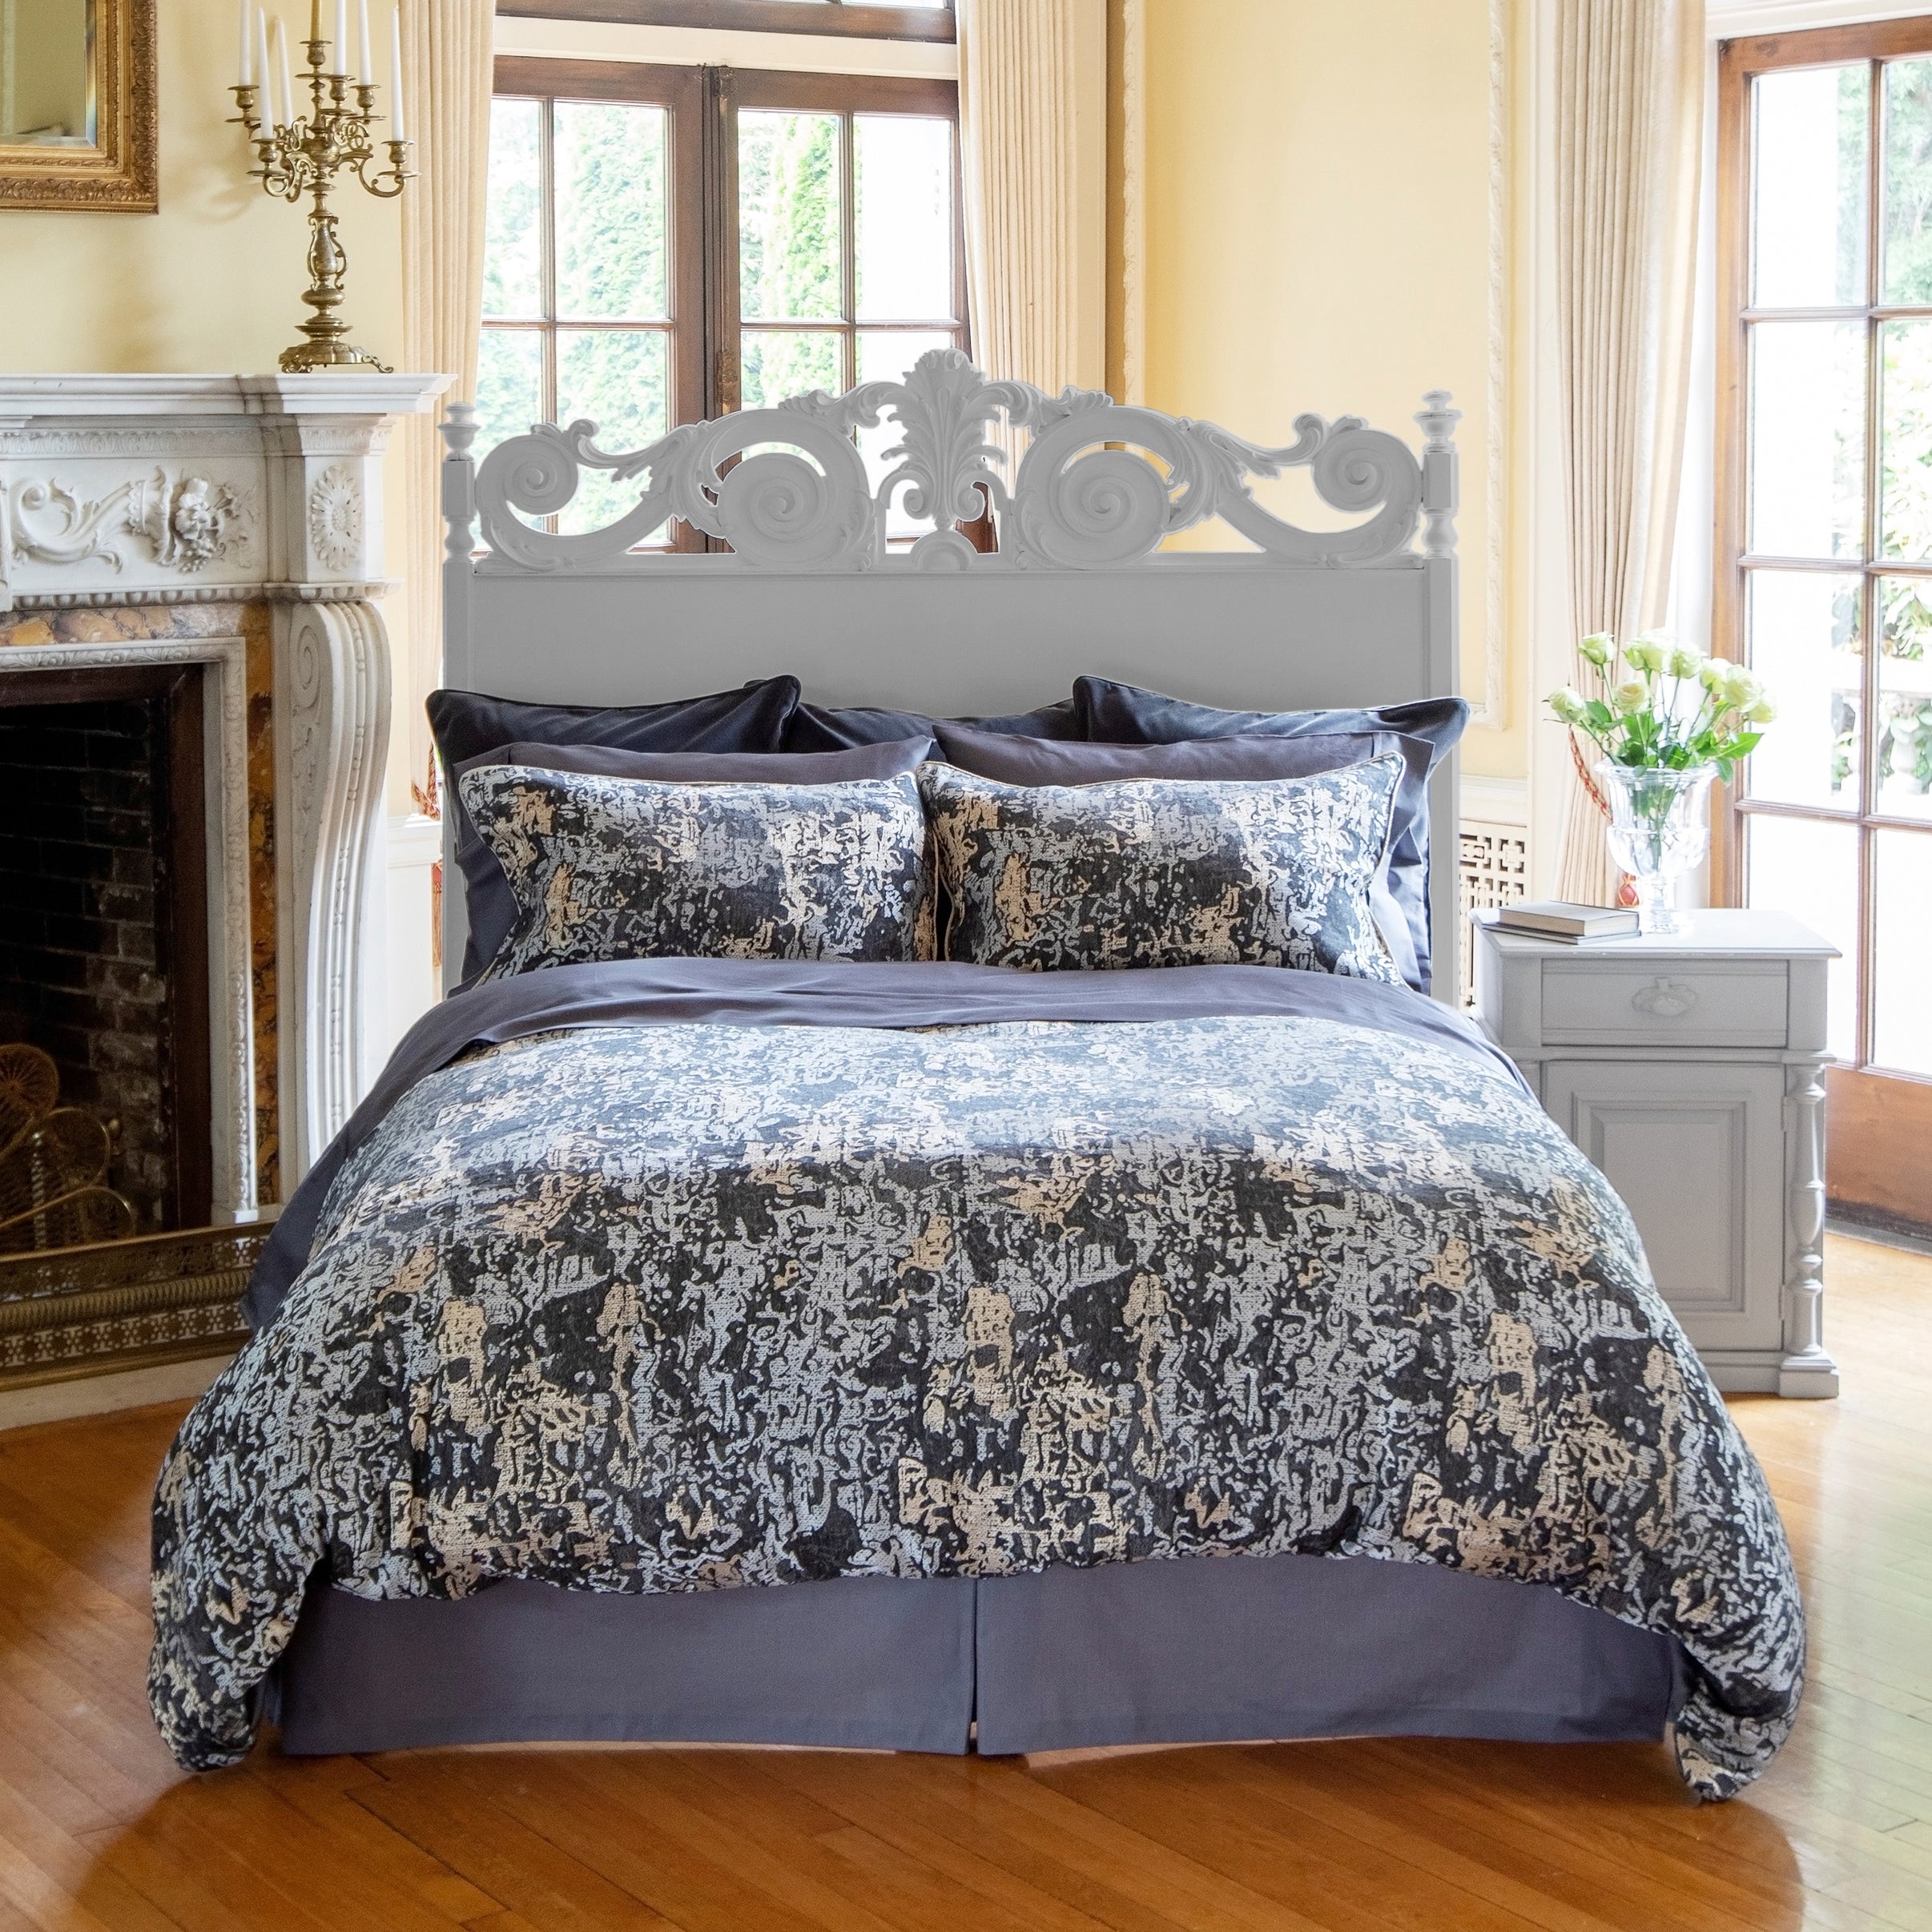 Argento Bed Linens